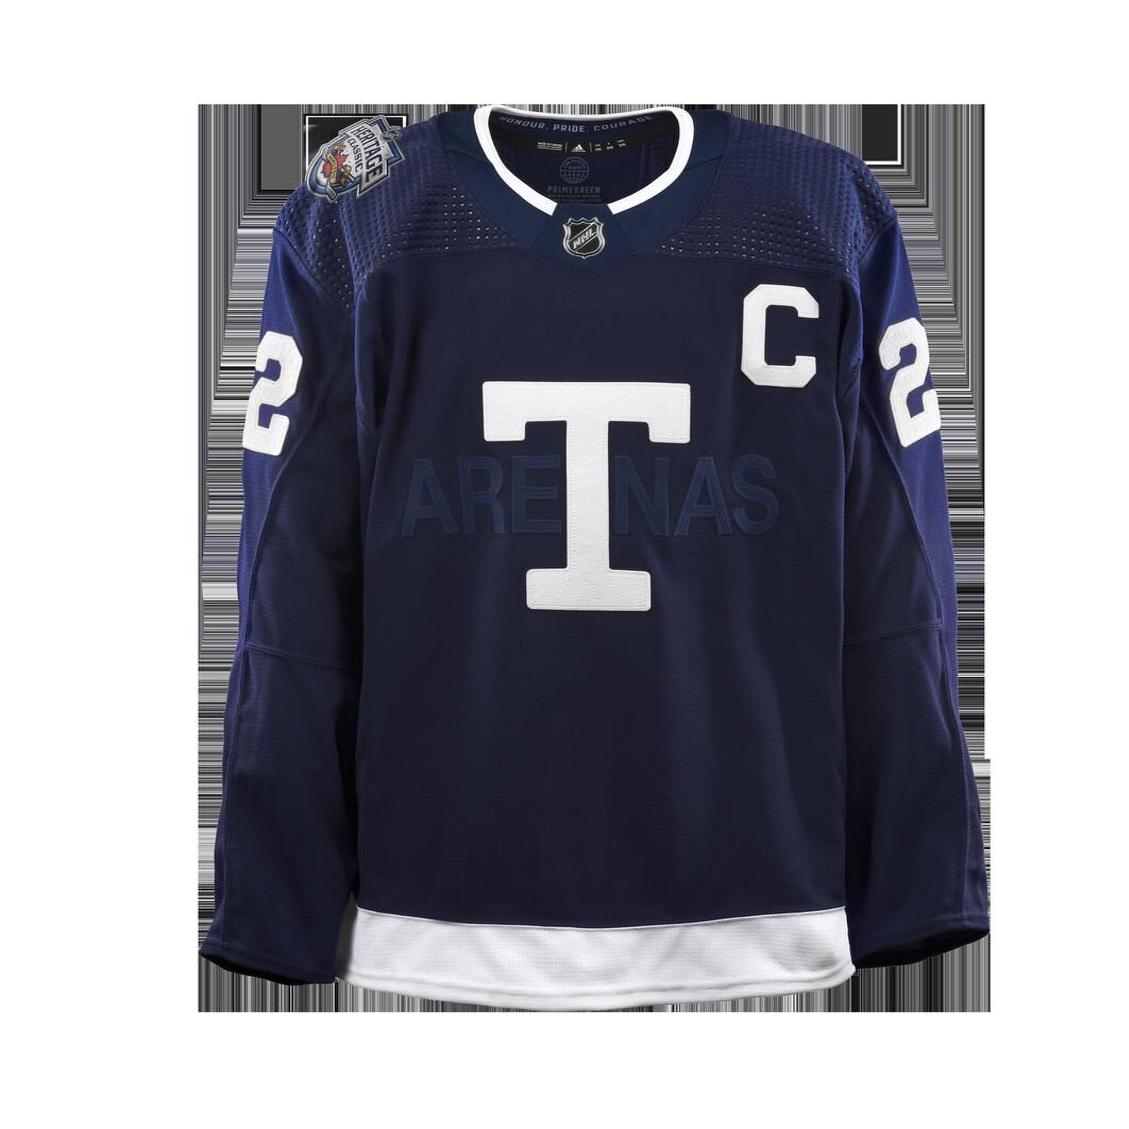 Maple Leafs to wear special throwback uniforms this March (PHOTOS)